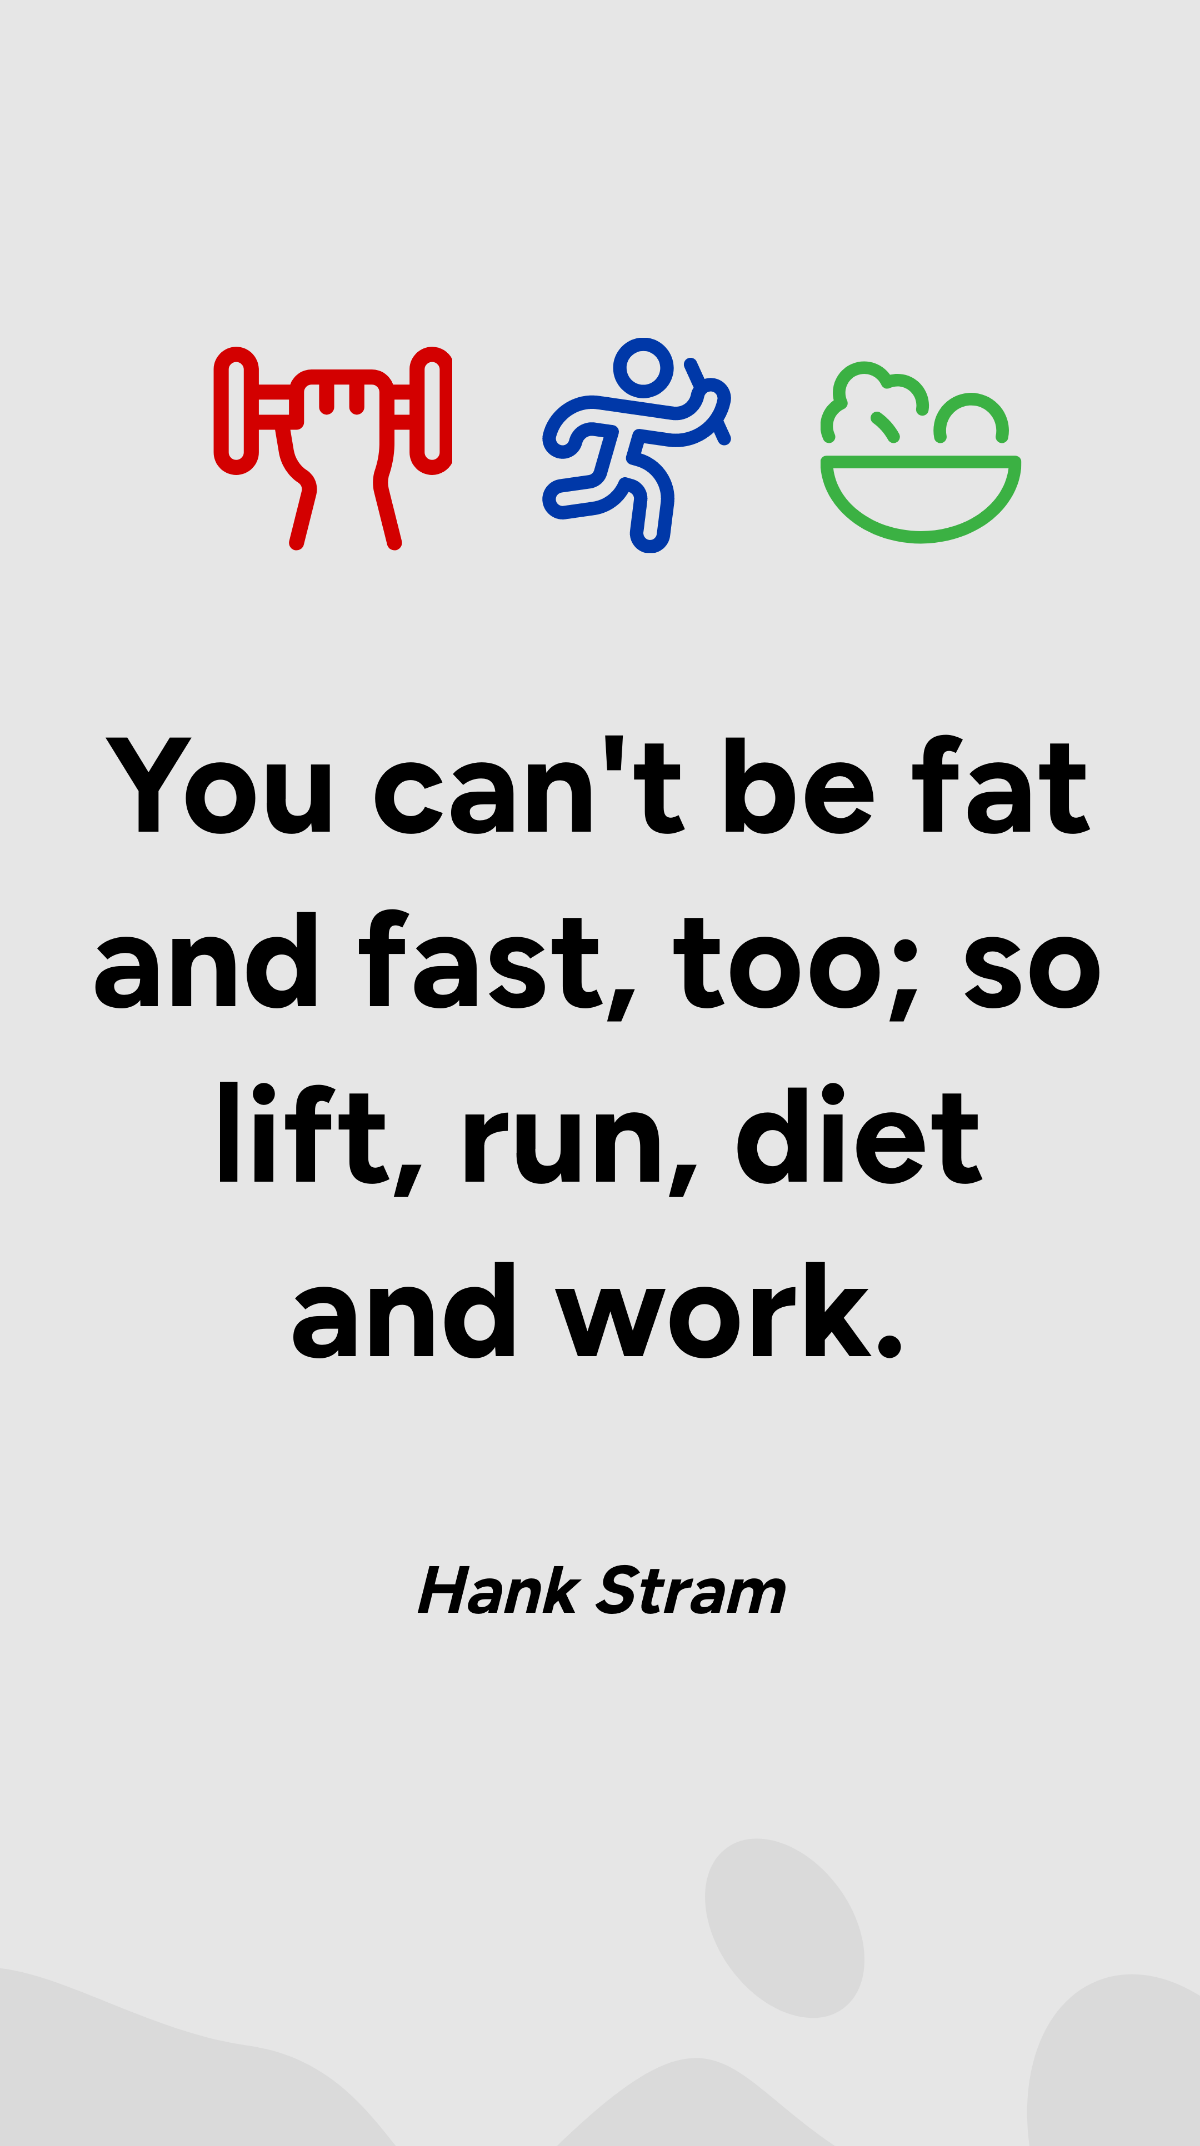 Free Hank Stram - You can't be fat and fast, too; so lift, run, diet and work. Template